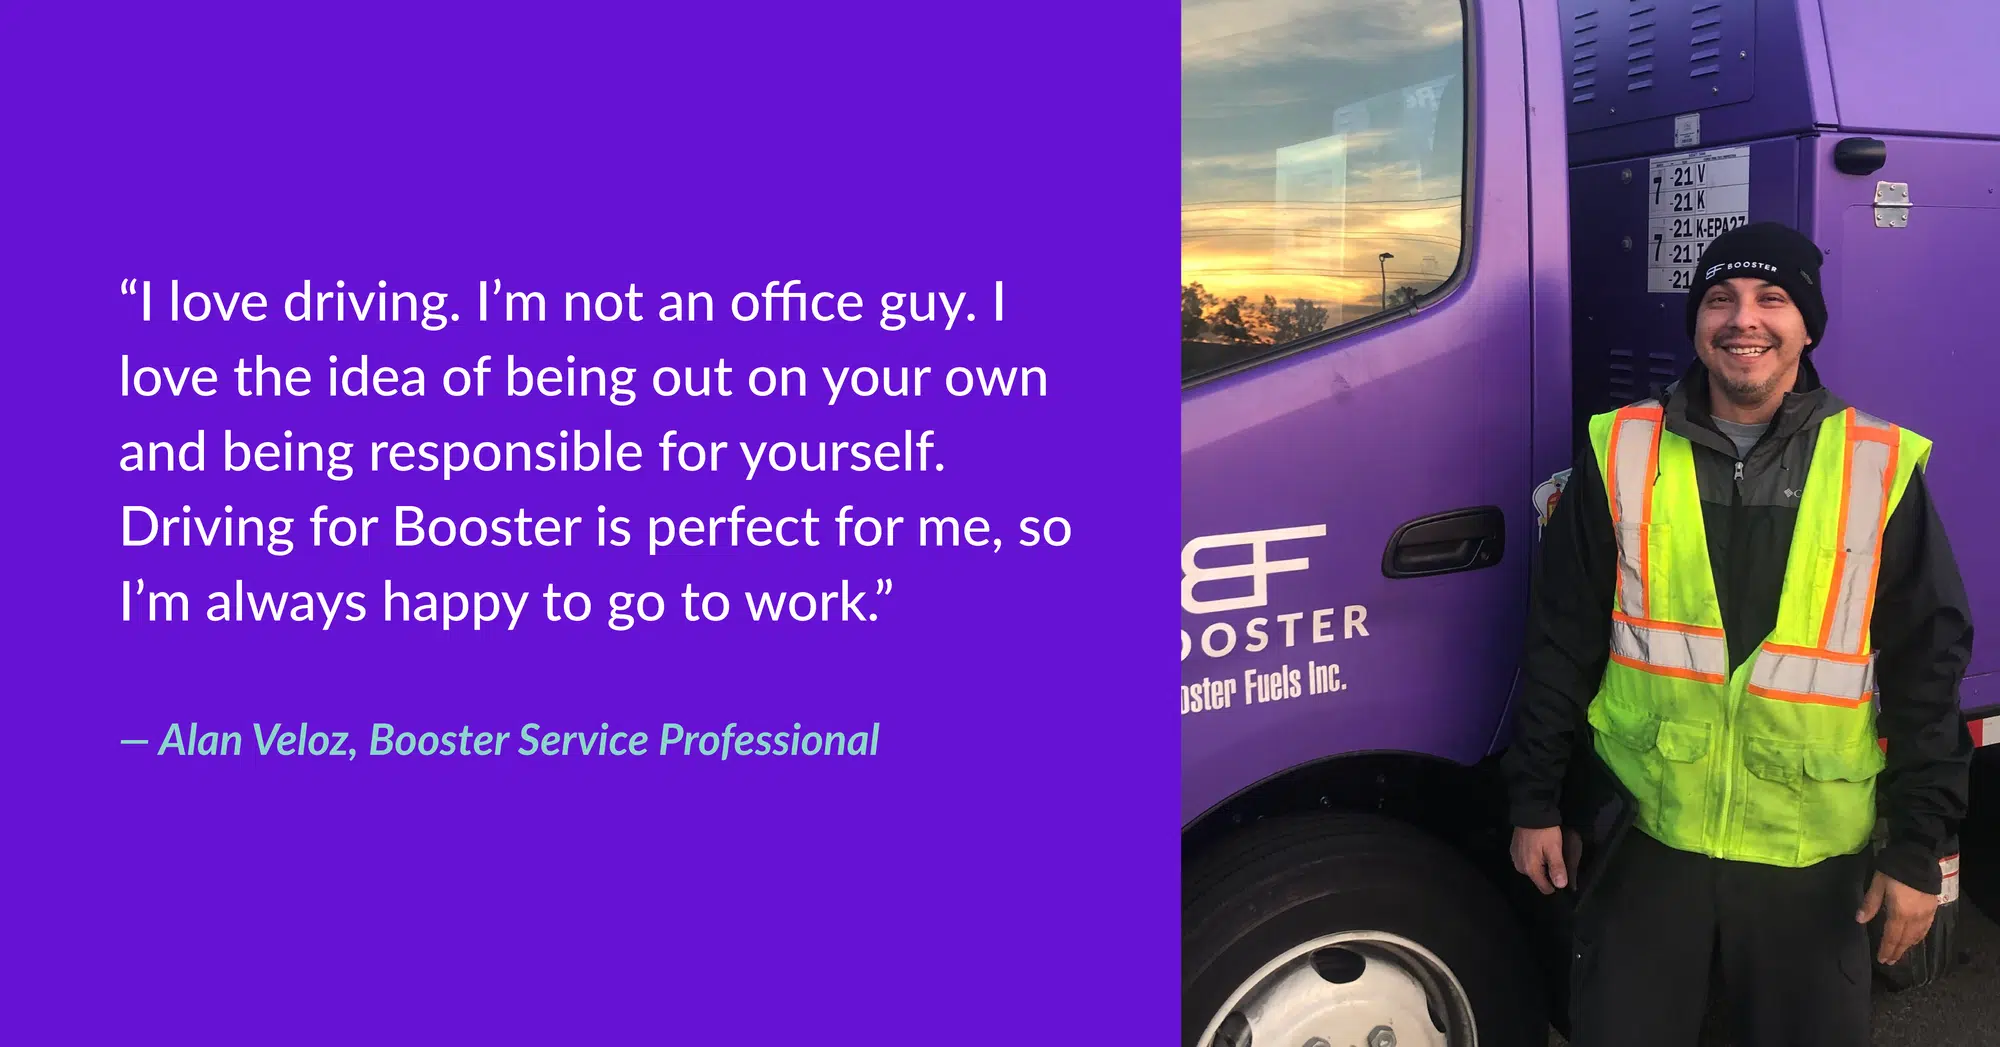 “I love driving. I’m not an office guy. I love the idea of being out on your own and being responsible for yourself. Driving for Booster is perfect for me, so I’m always happy to go to work.” - Alan Veloz, Booster Service Professional